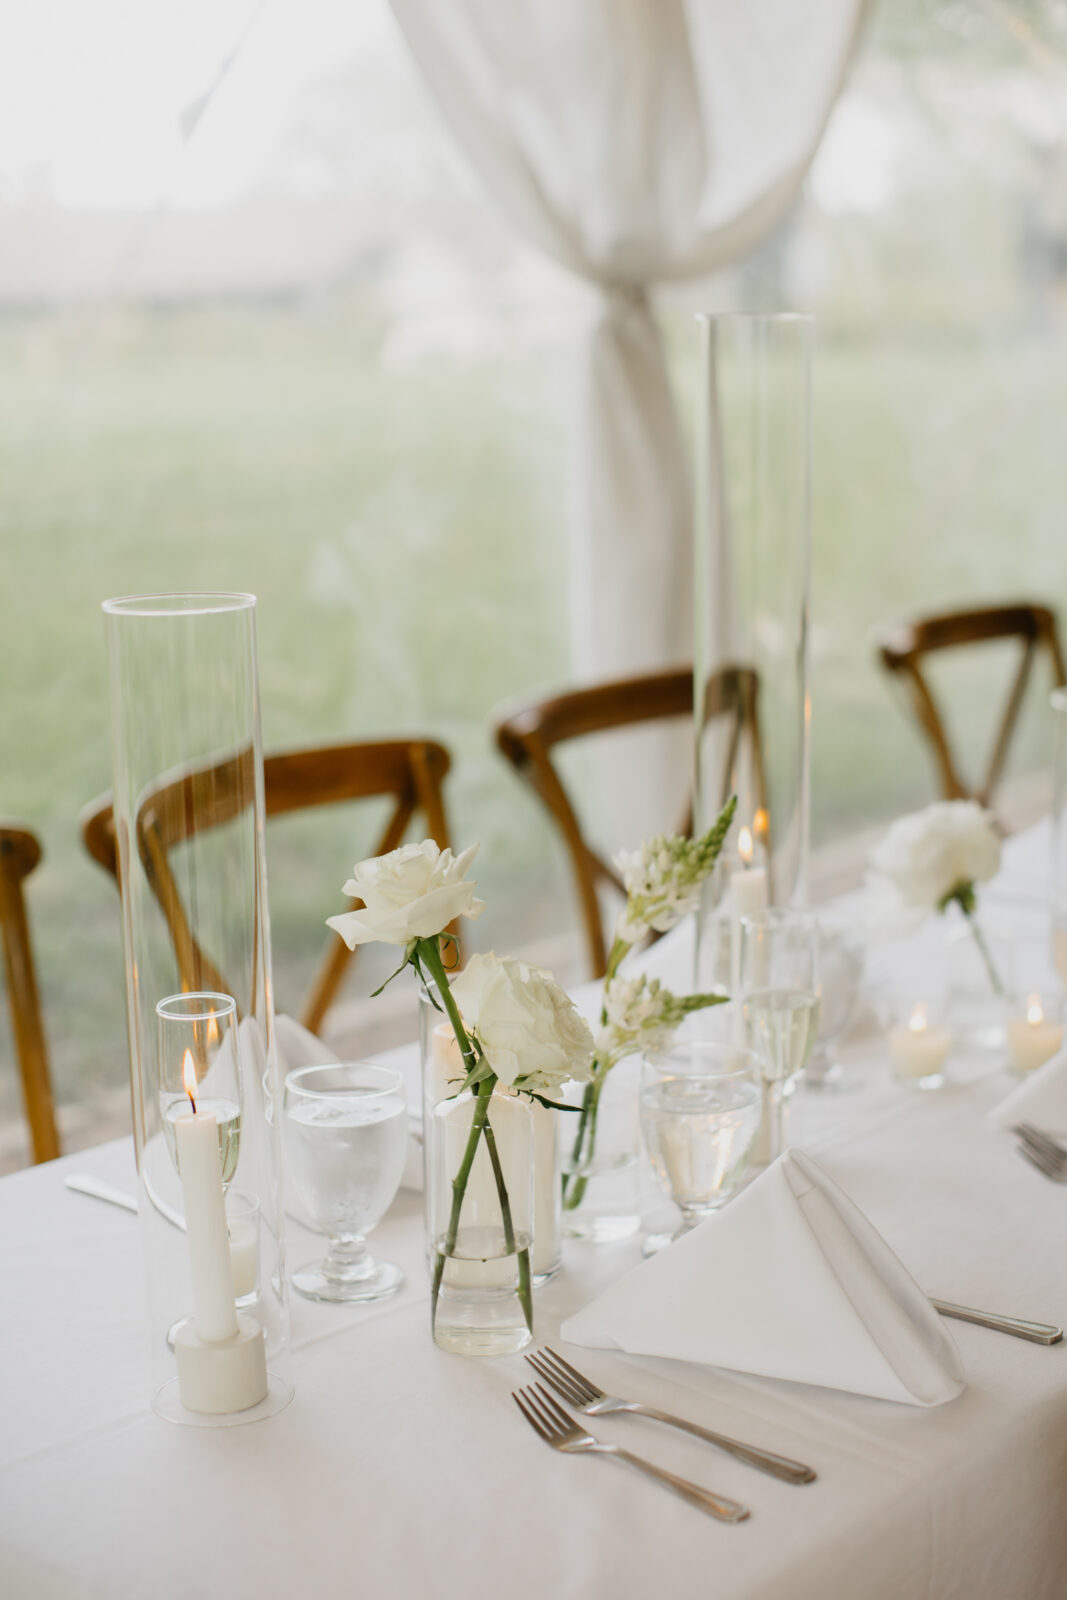 Details of the bride and groom's wedding reception